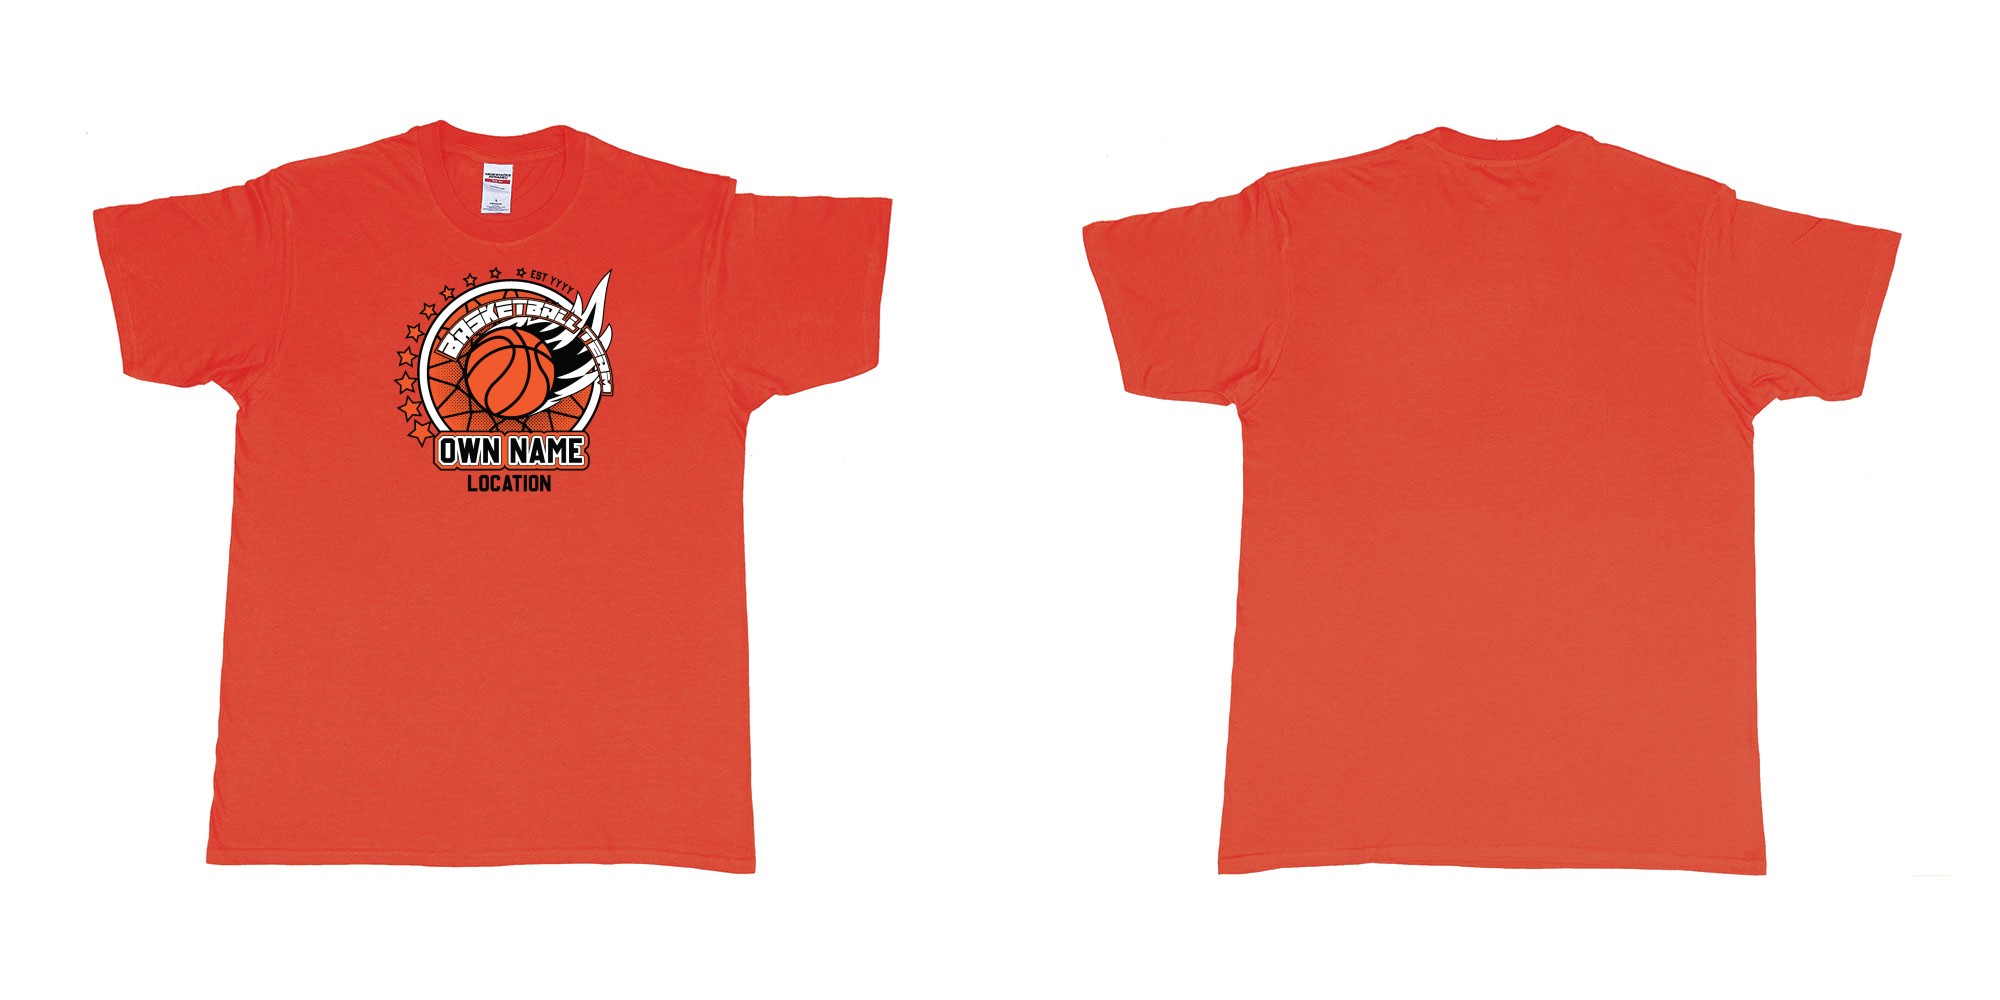 Custom tshirt design basketball team own name location established year custom design production bali in fabric color red choice your own text made in Bali by The Pirate Way